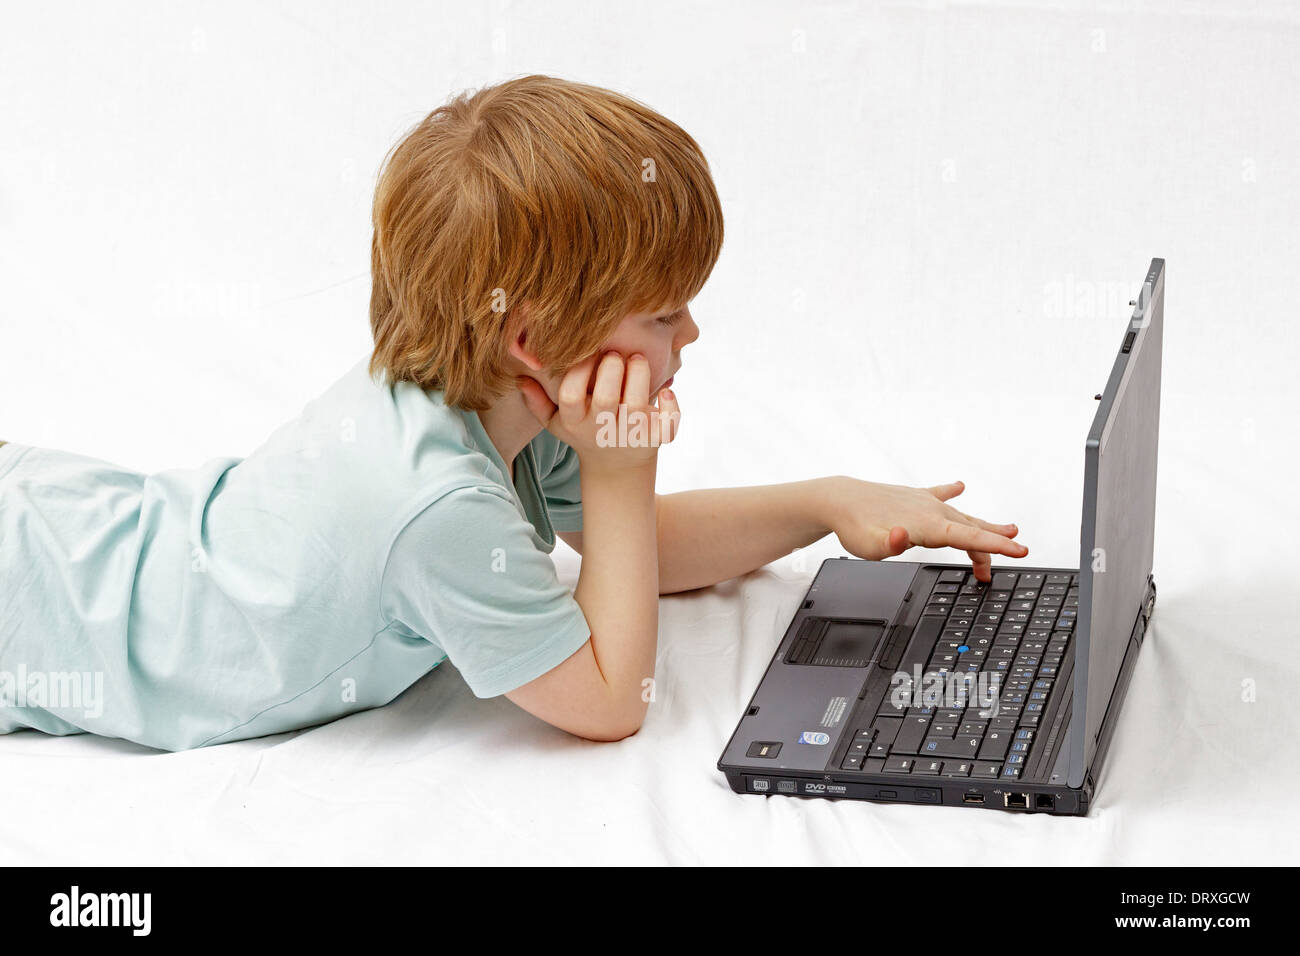 portrait of a young boy in front of a laptop Stock Photo